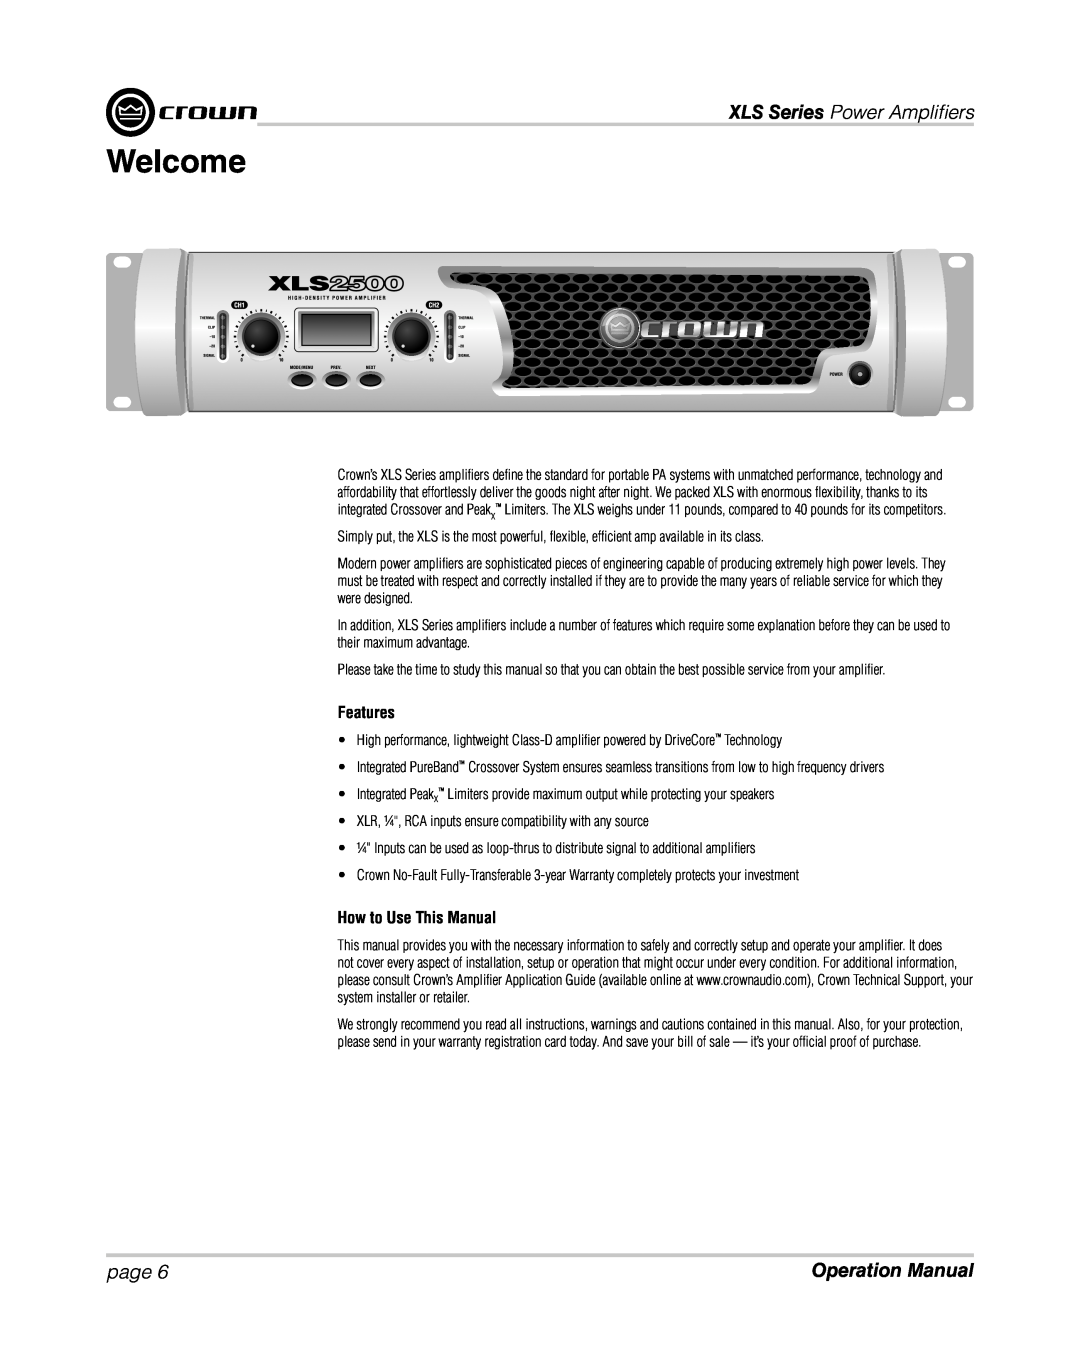 Crown XLS 1000 operation manual Welcome, Features, How to Use This Manual, XLS Series Power Ampliﬁ ers, page 